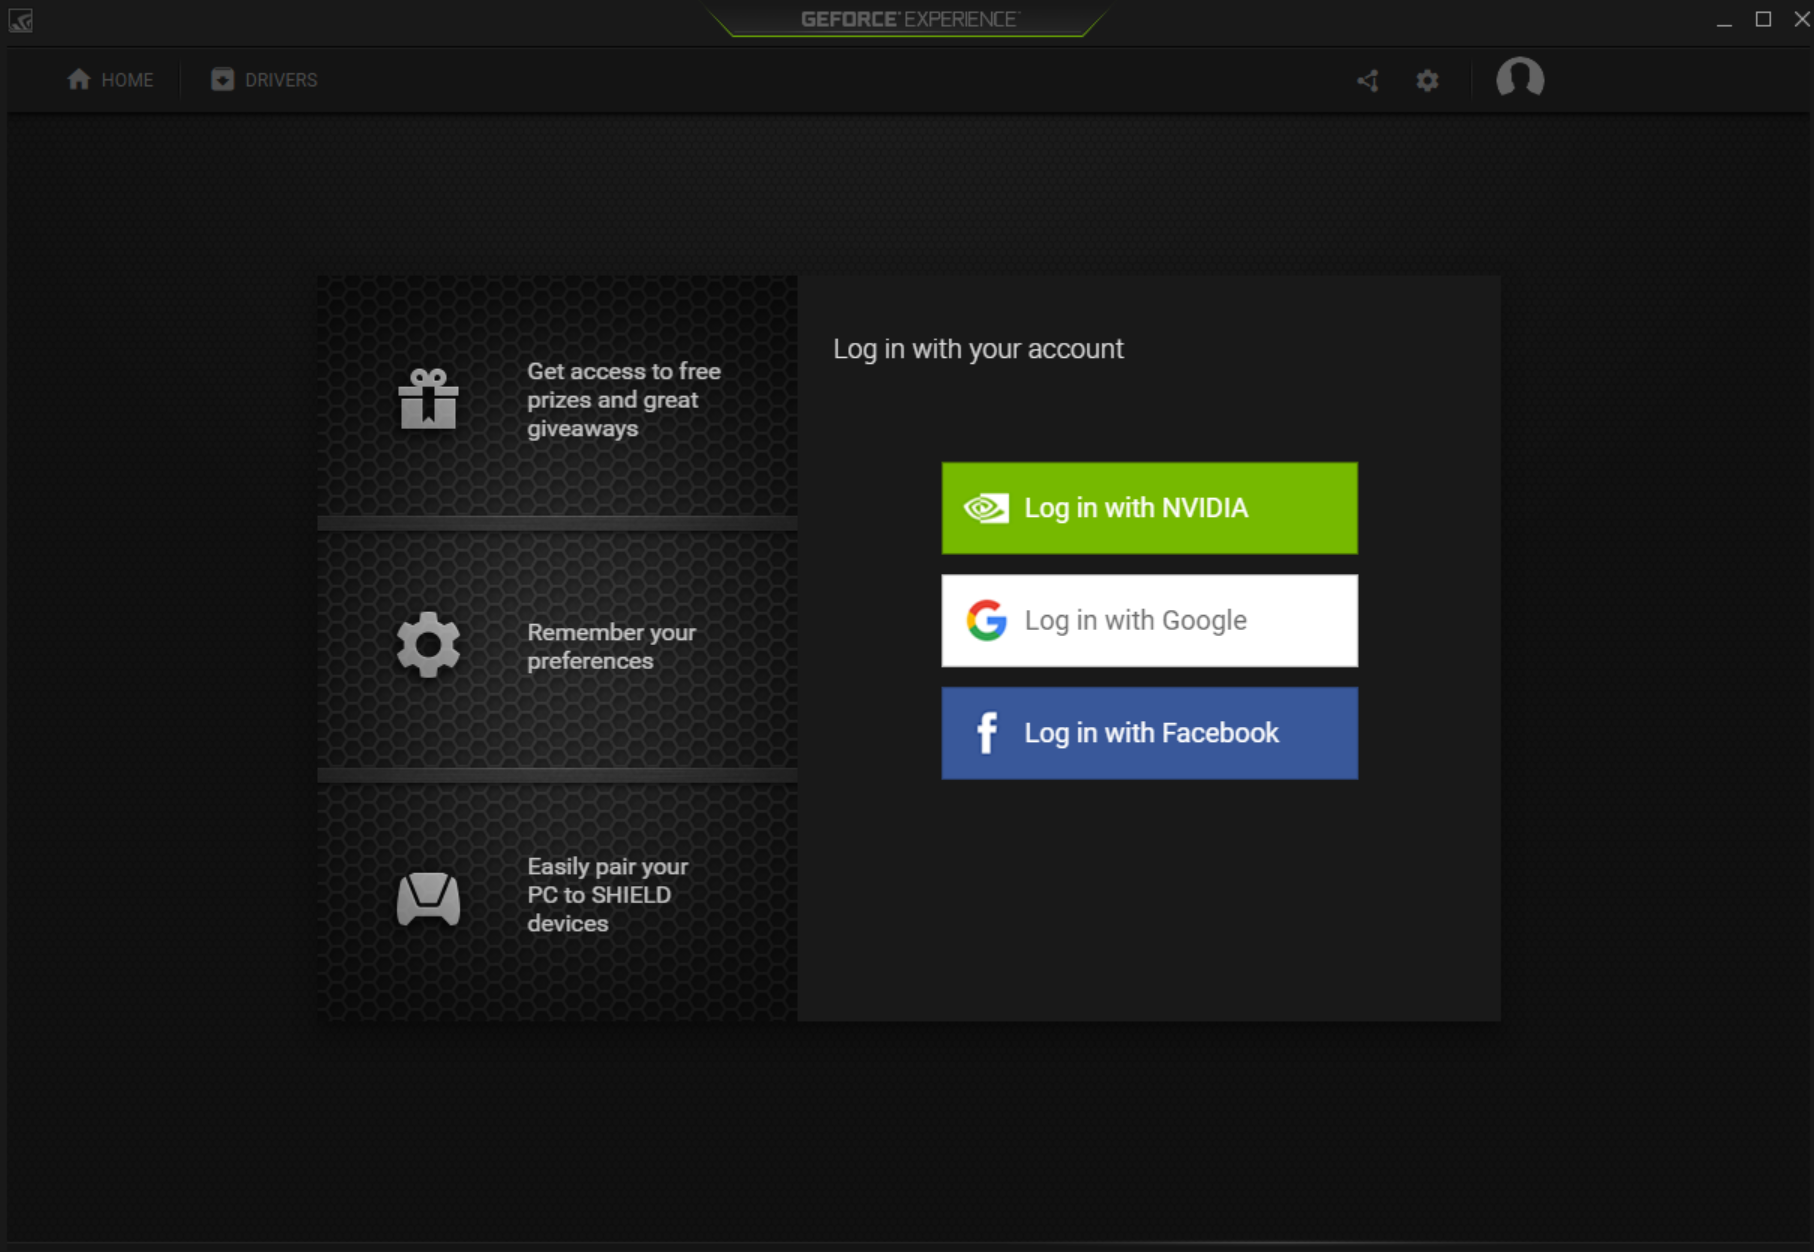 geforce experience driver download stuck at 100